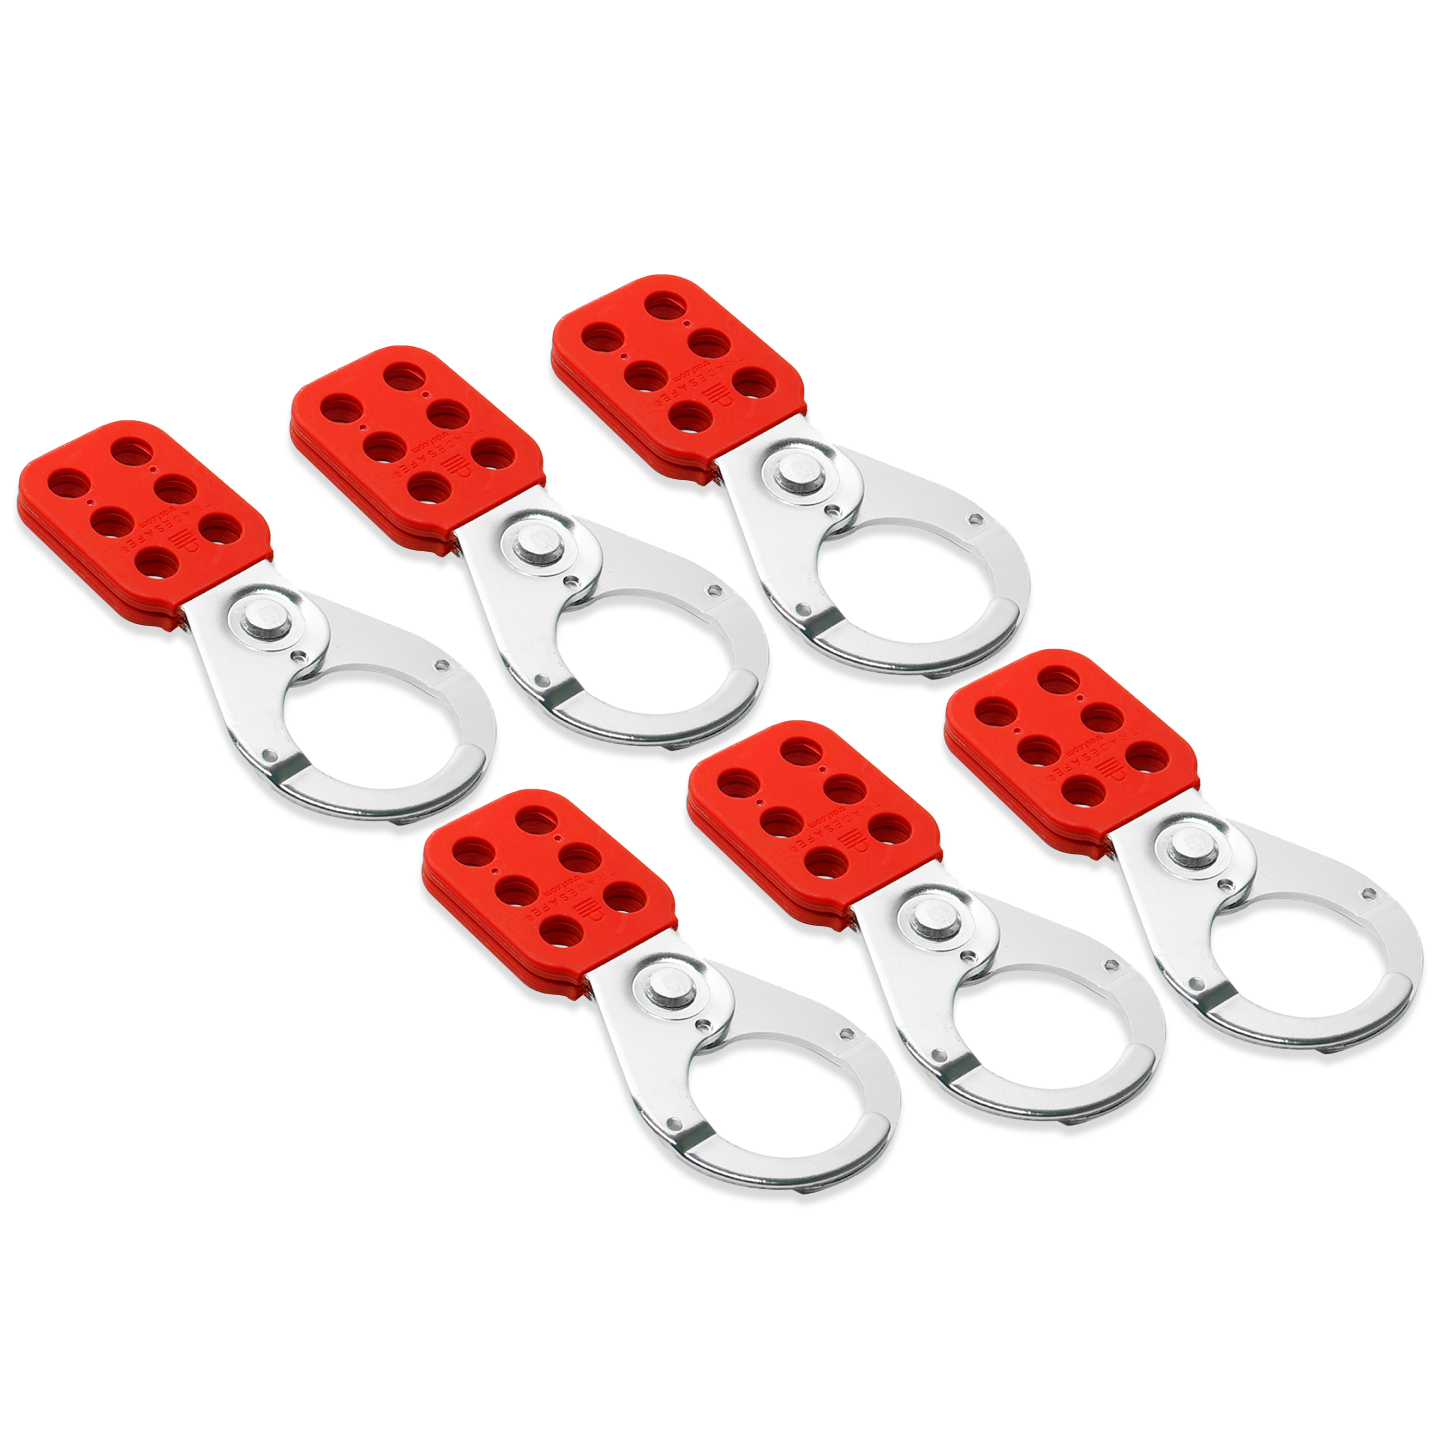 Lockout Tagout Hasp – Nylon and Steel, 1-1/2" Jaw Diameter, 6 Pack